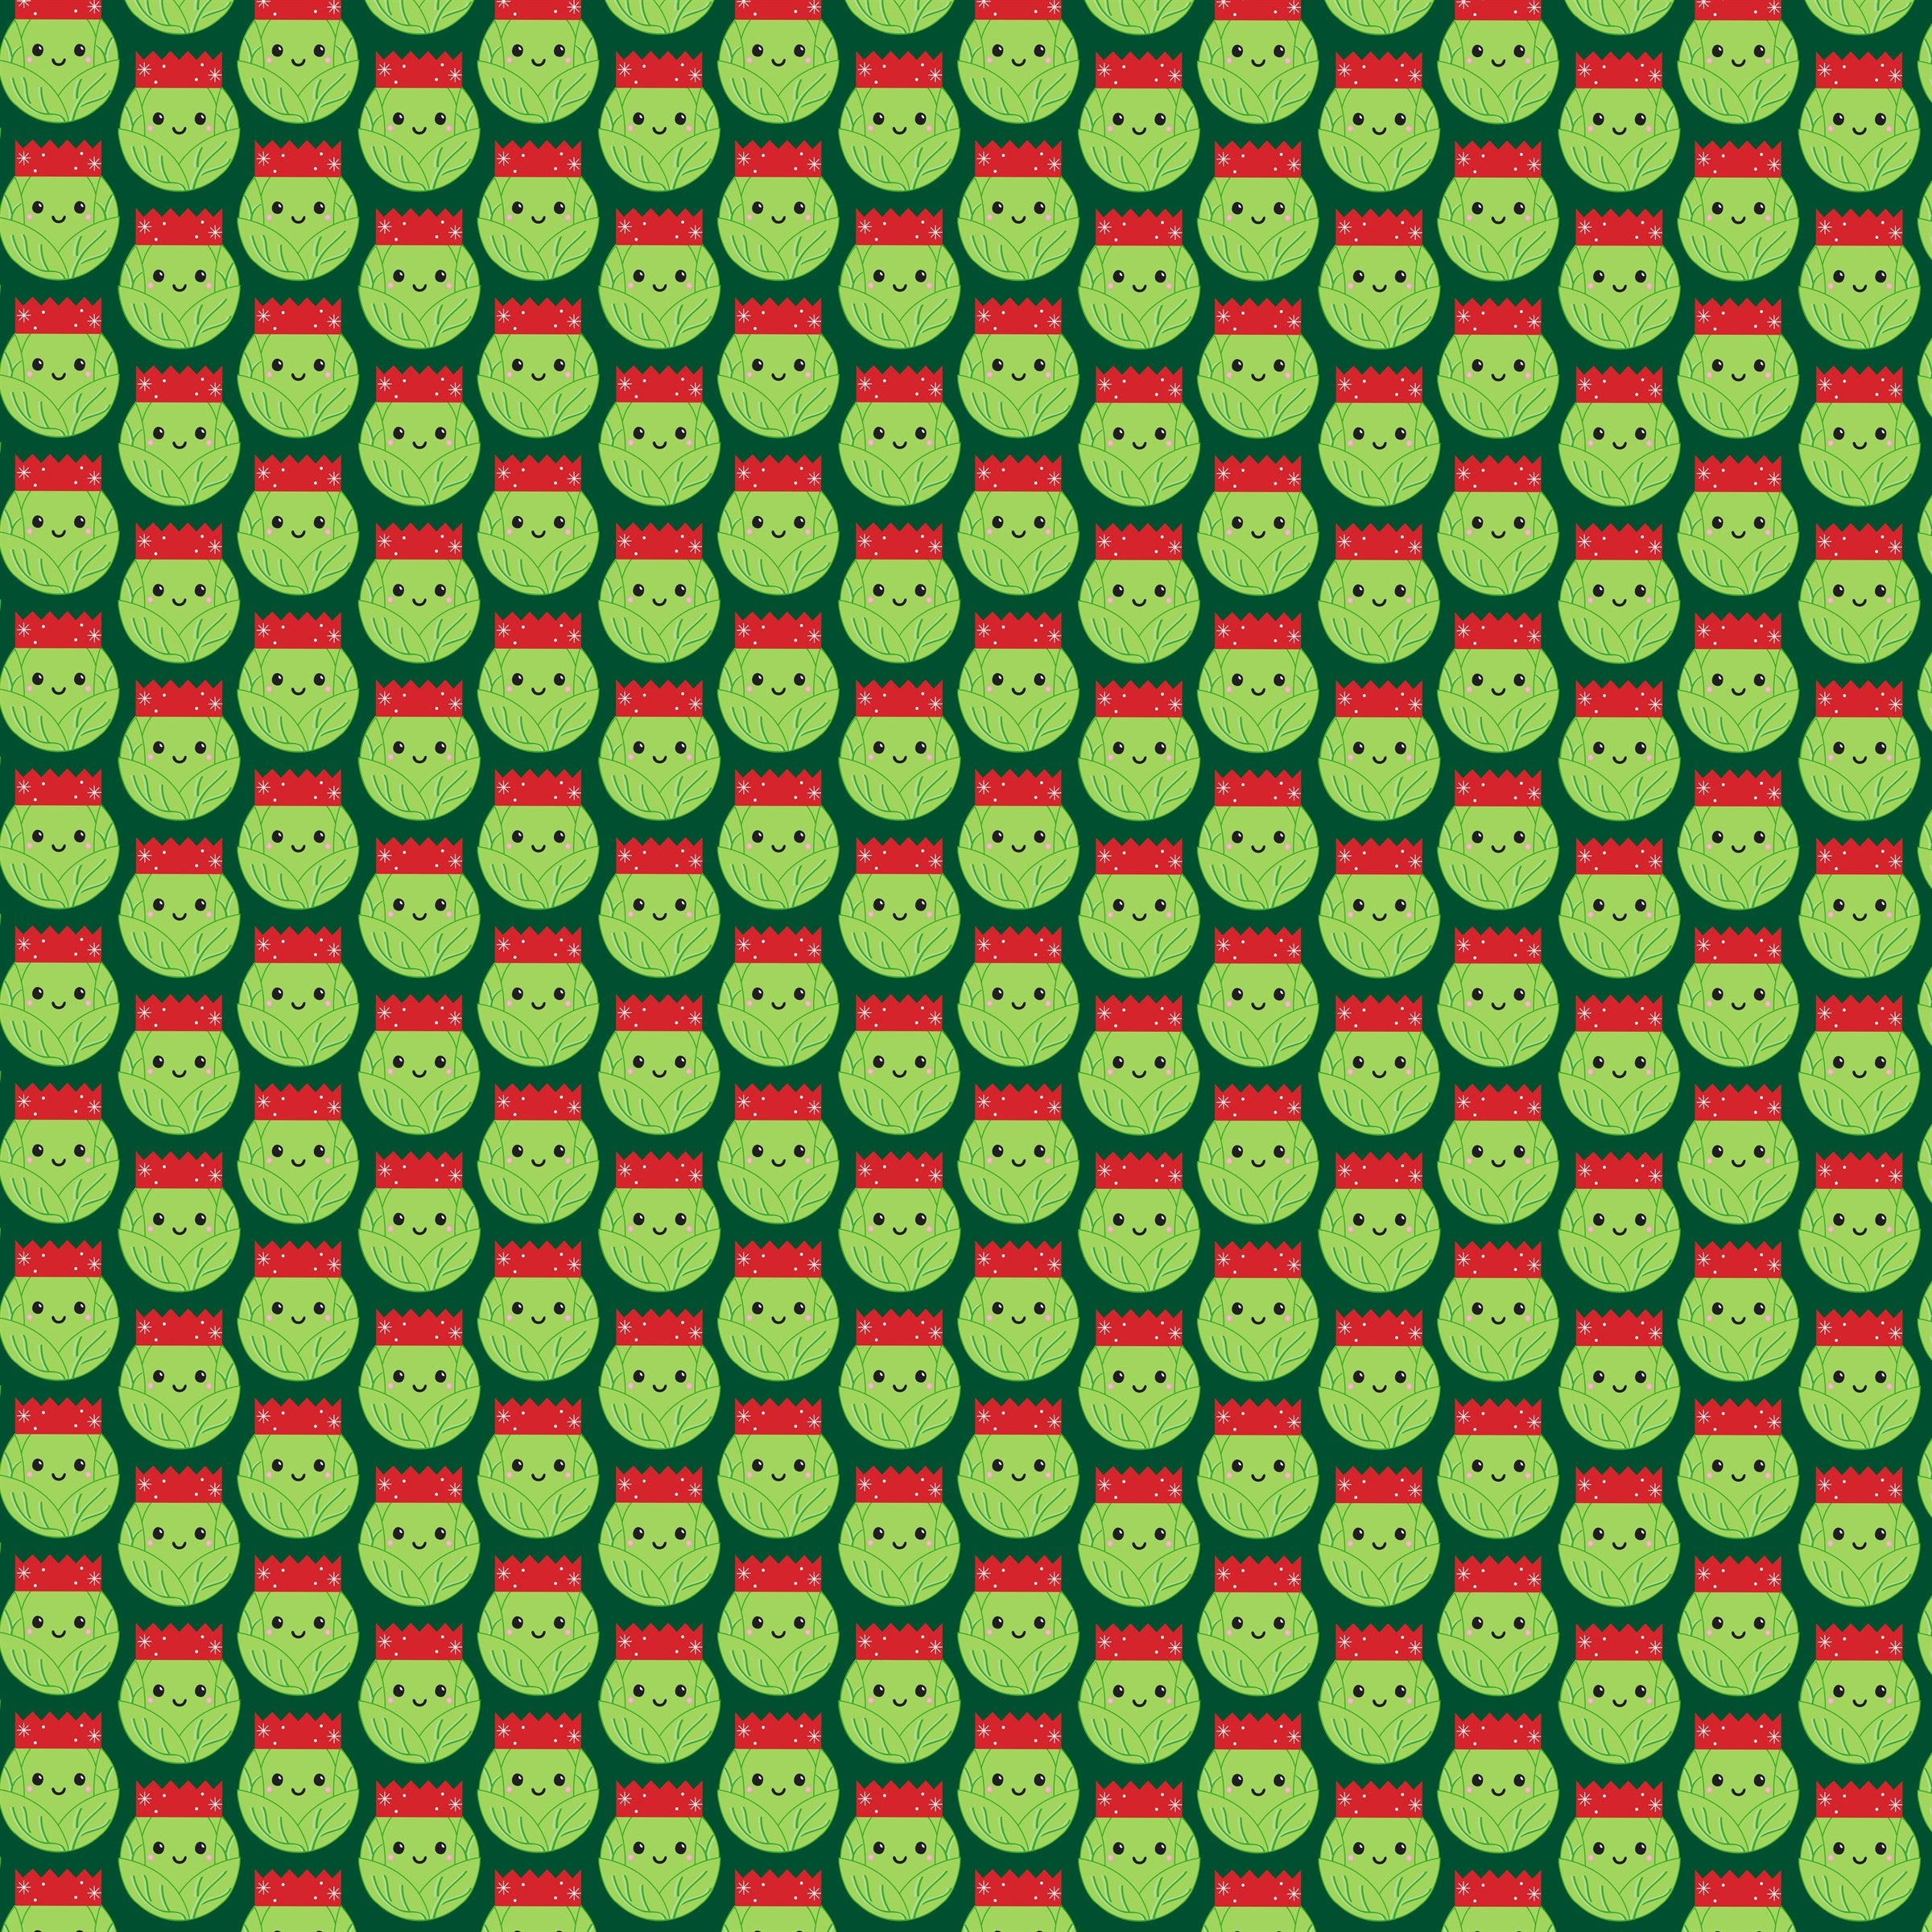 Sass and Belle Christmas Brussels Sprouts Festive Food Wrapping Gift Wrap Paper - Kate's Cupboard